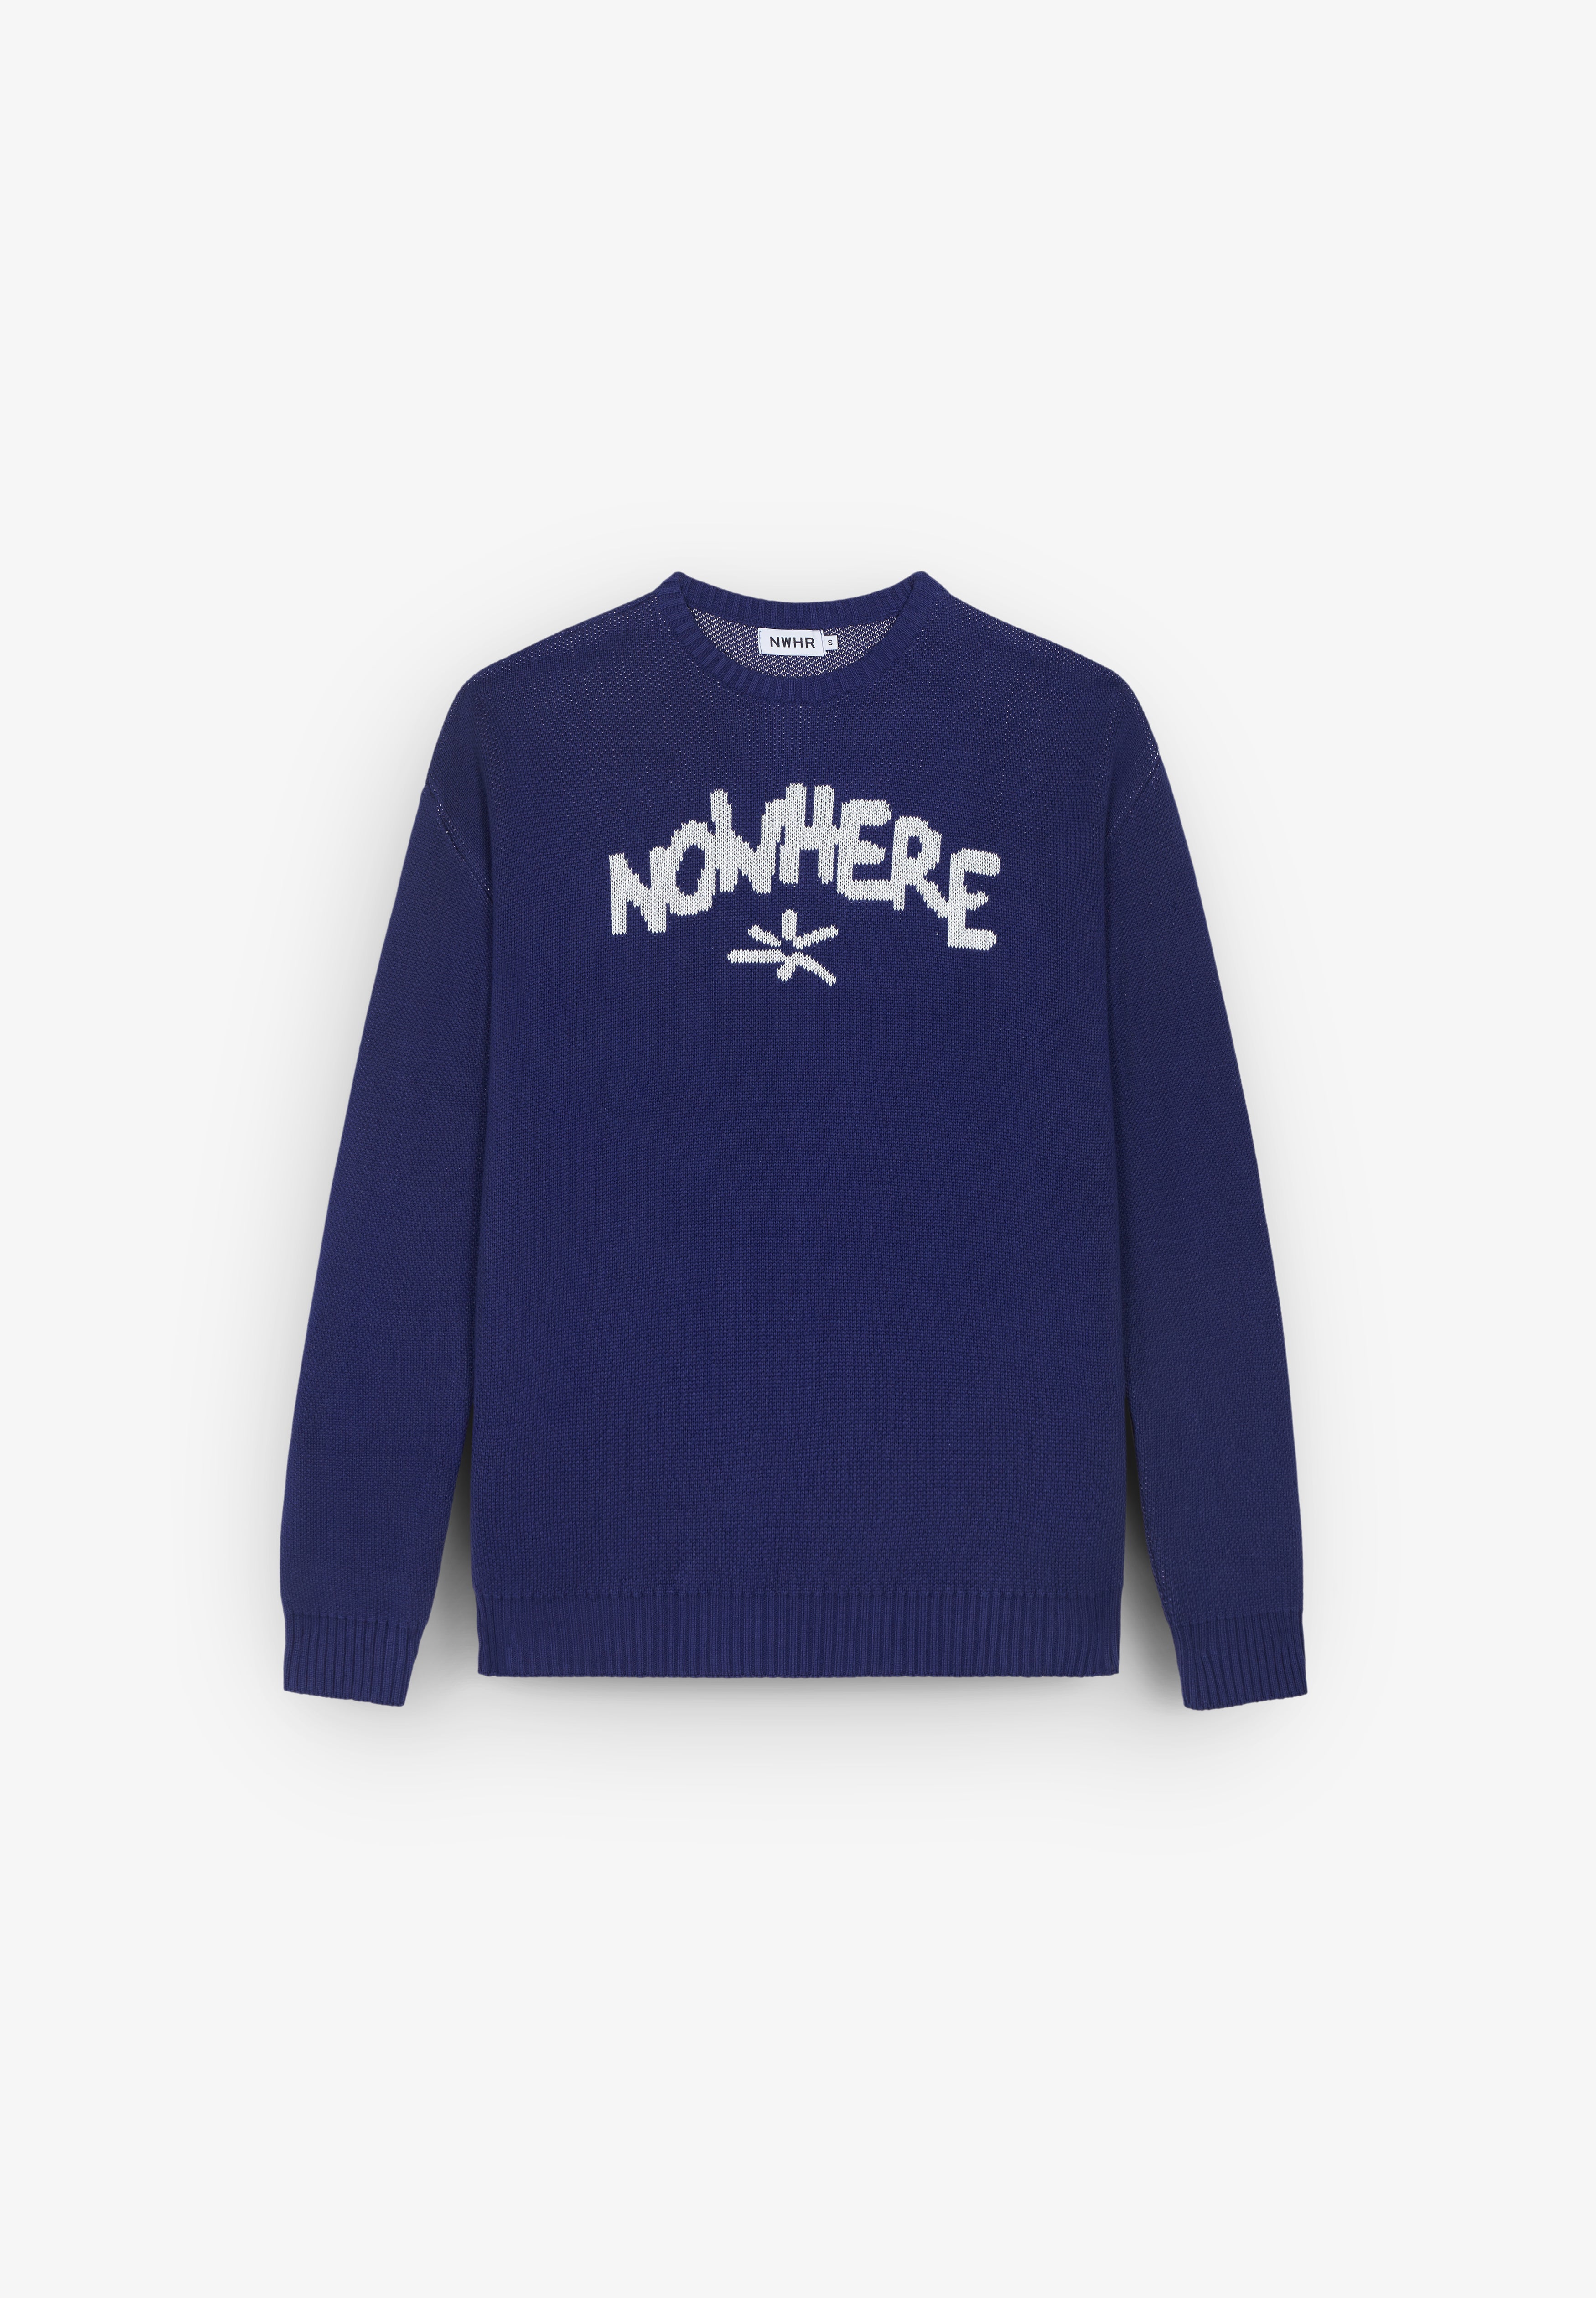 NWHR | NOWHERE JERSEY